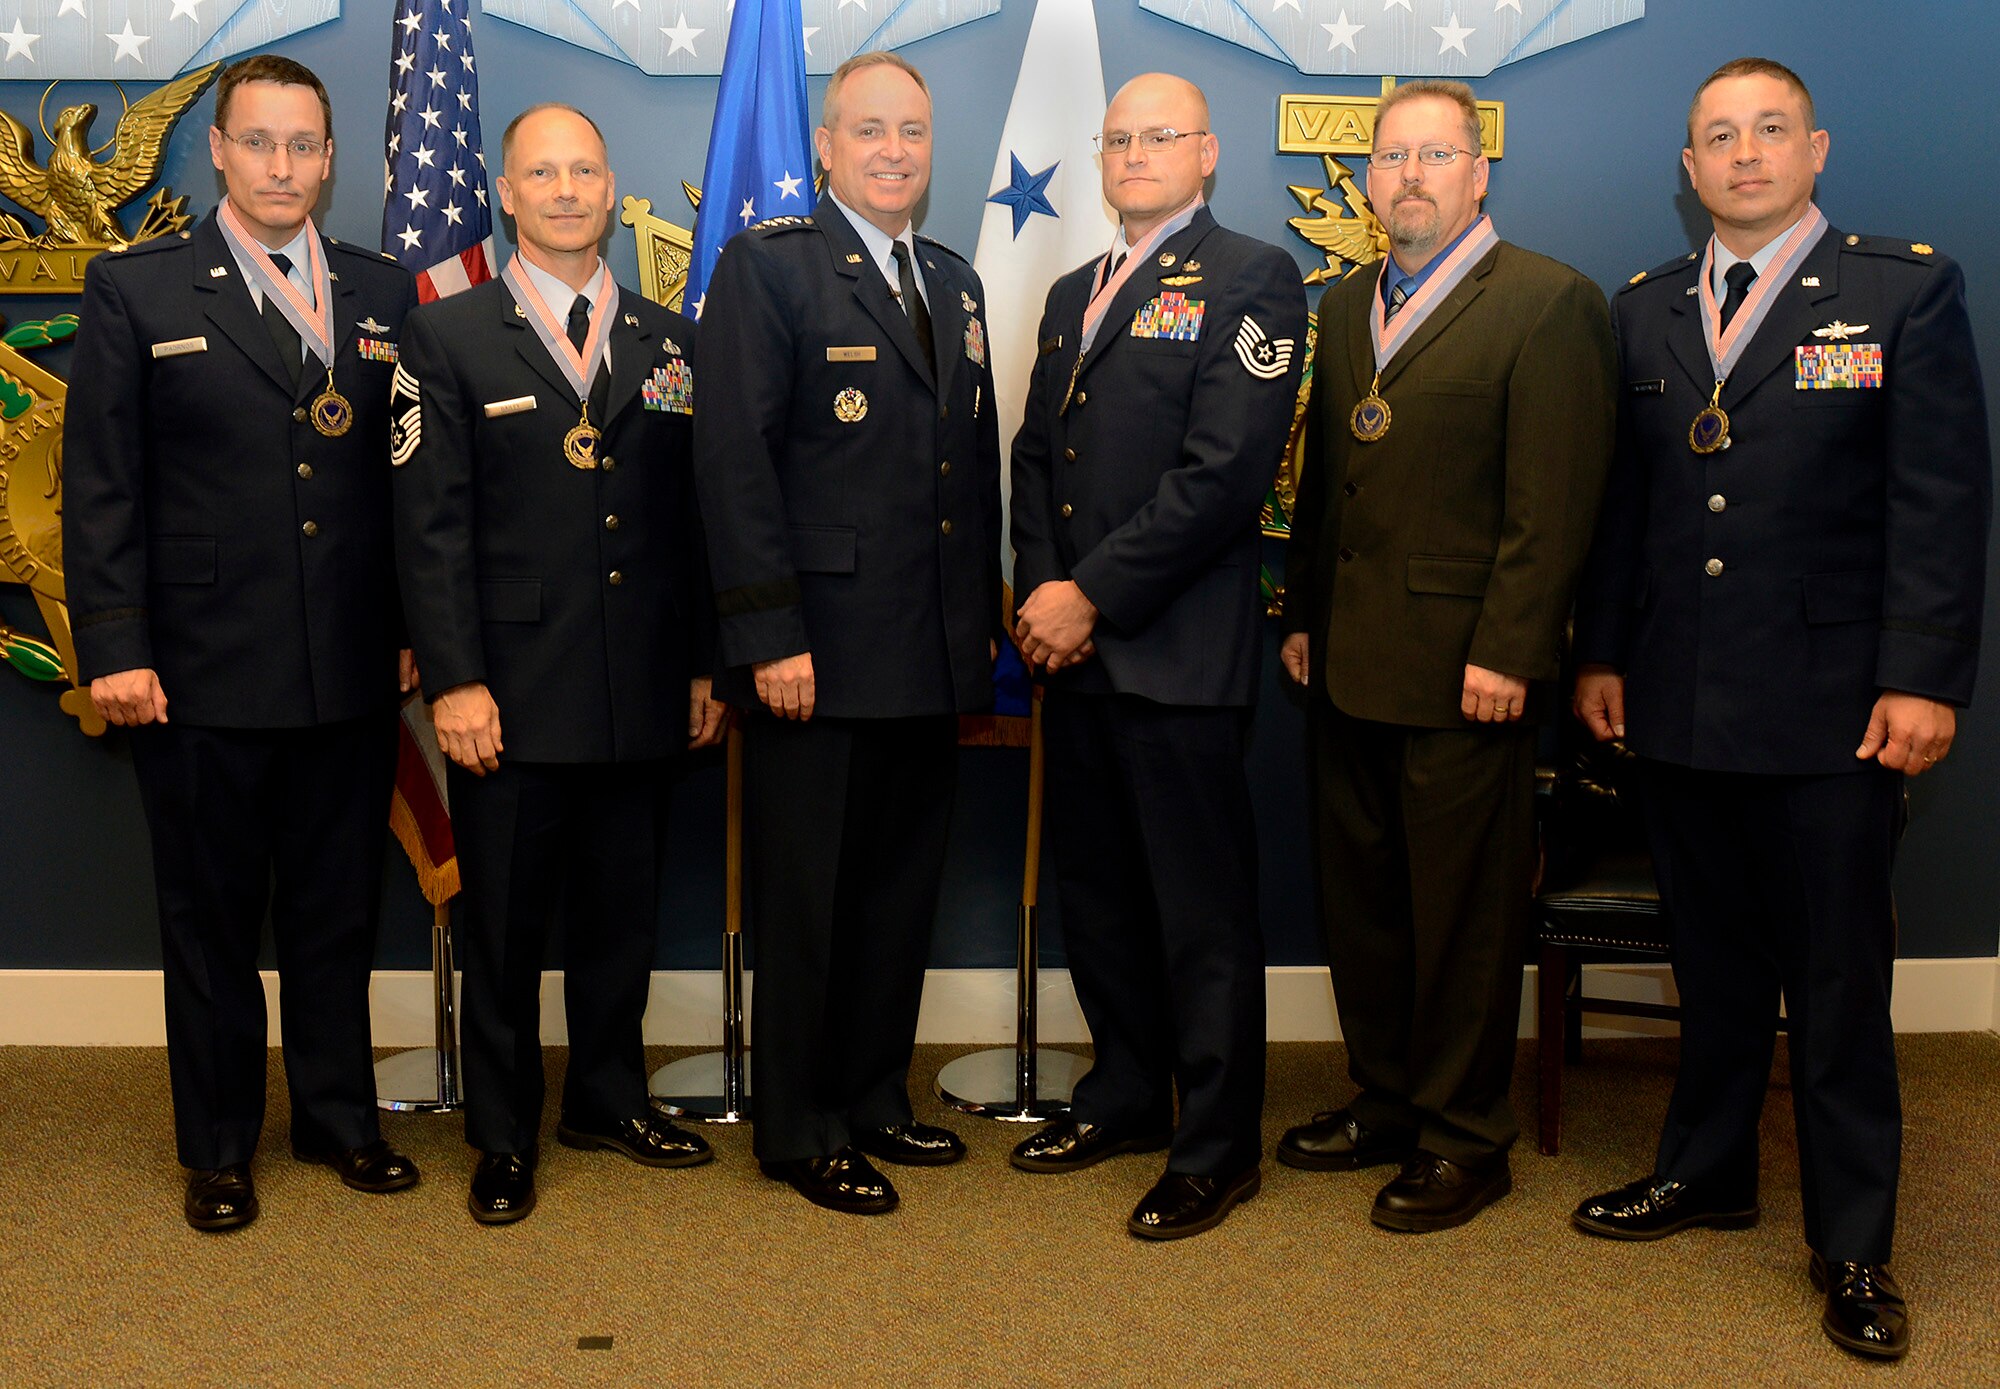 Members of the first runner-up of the 2012 Chief of Staff Team Excellence Award, the BRAC AFRL Radar Relocation Project Management Team from Stewart Air National Guard Base, N.Y., are congratulated by Air Force Chief of Staff Gen. Mark A. Welsh III in a Pentagon ceremony on Nov. 27, 2012.  (U.S. Air Force photo/Scott M. Ash)

